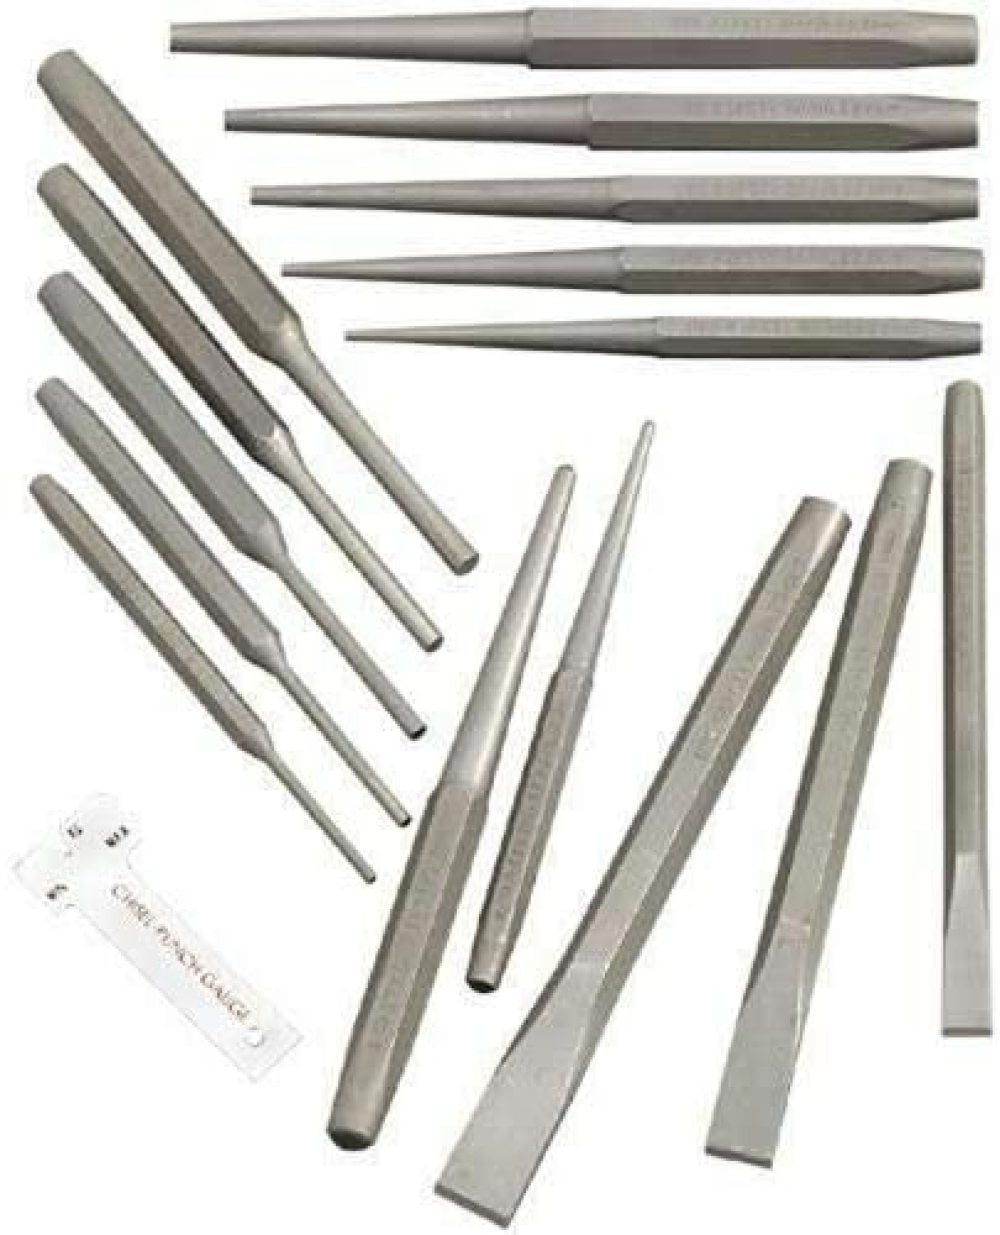 Cold Steel Mechanics Garage Tool 16pc Punch and Chisel Set 